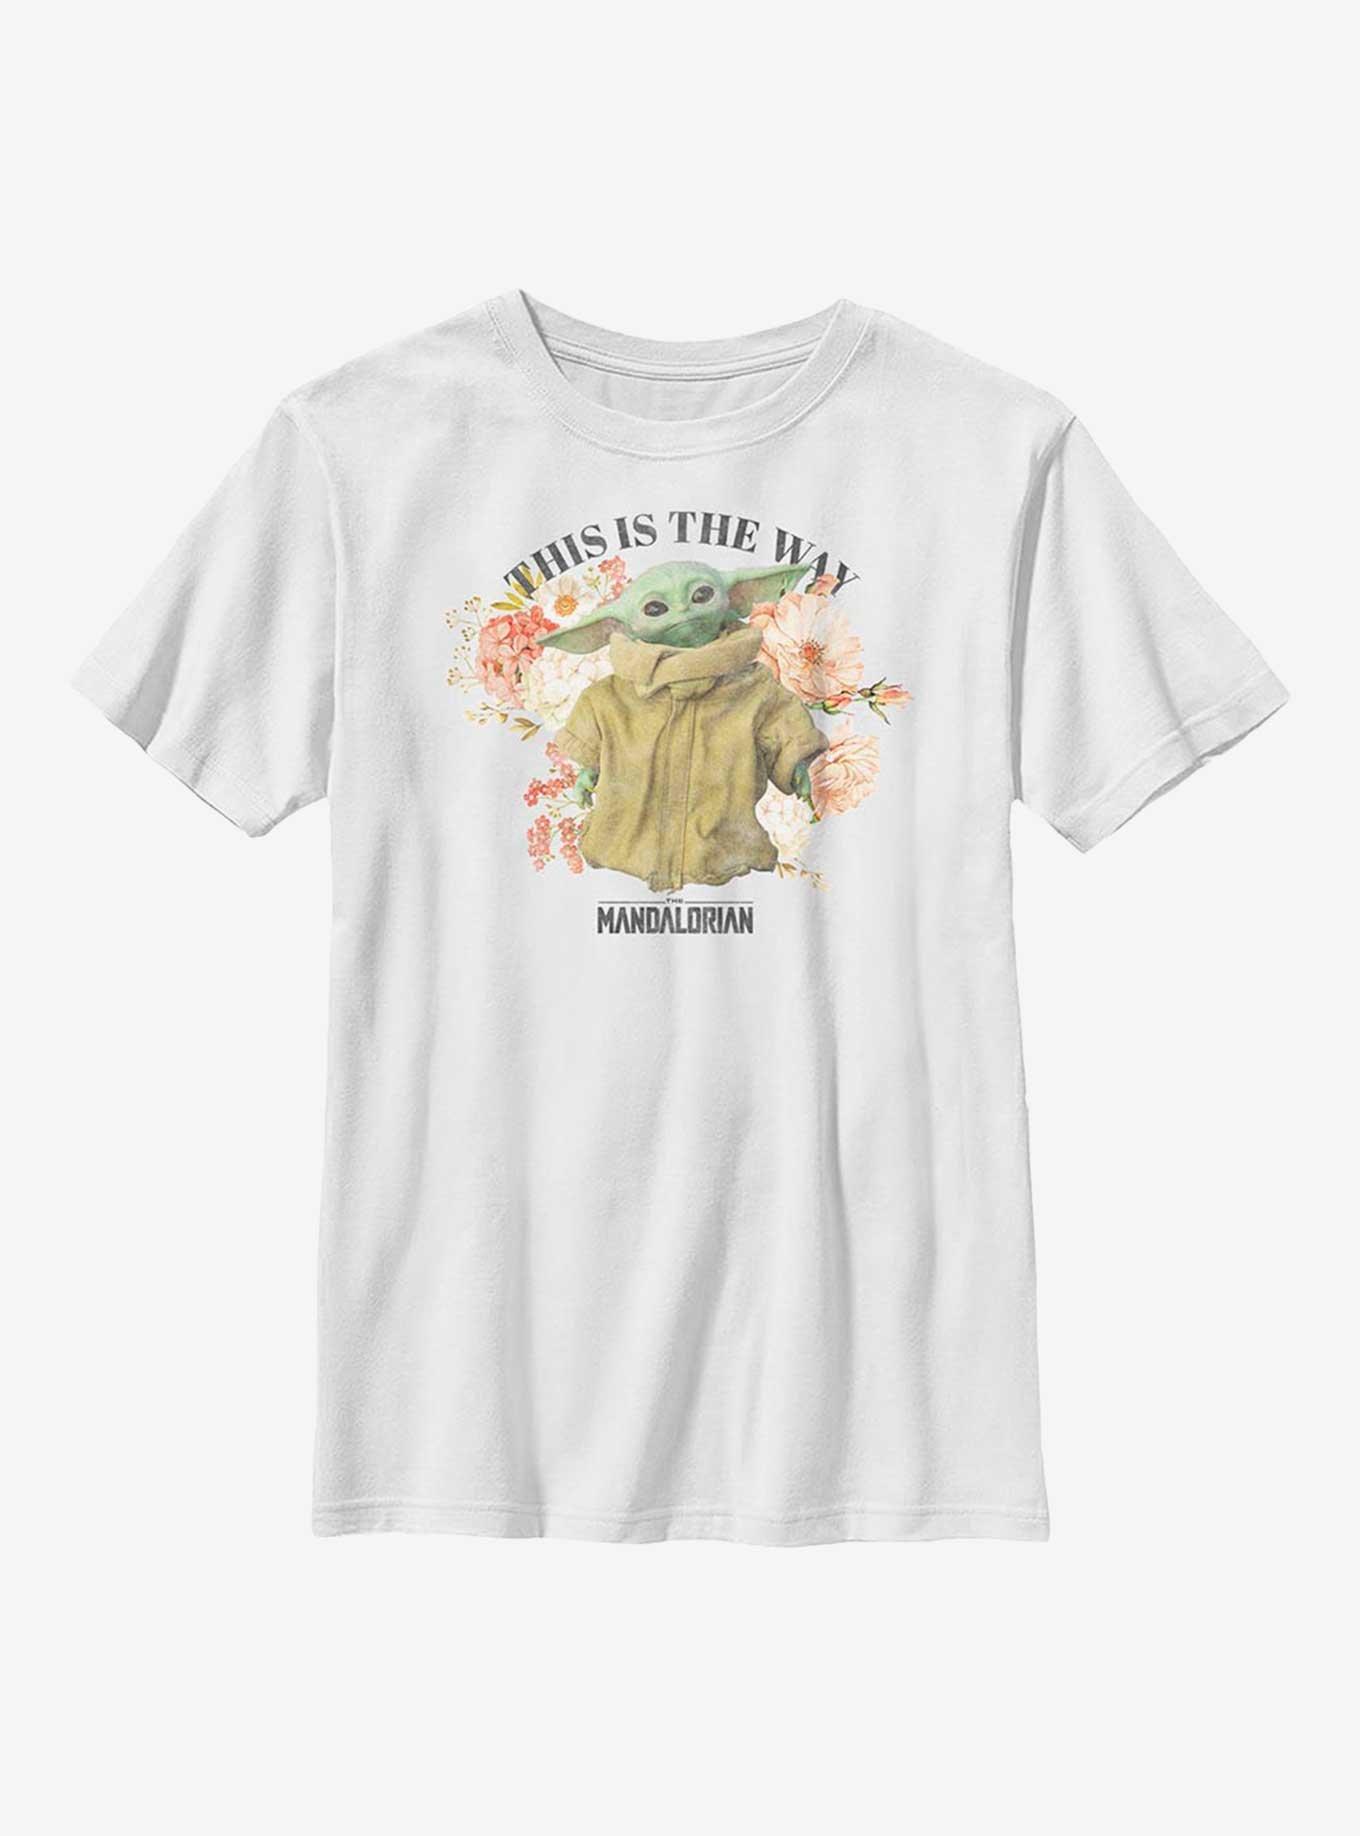 Star Wars The Mandalorian Floral The Child Youth T-Shirt, , hi-res